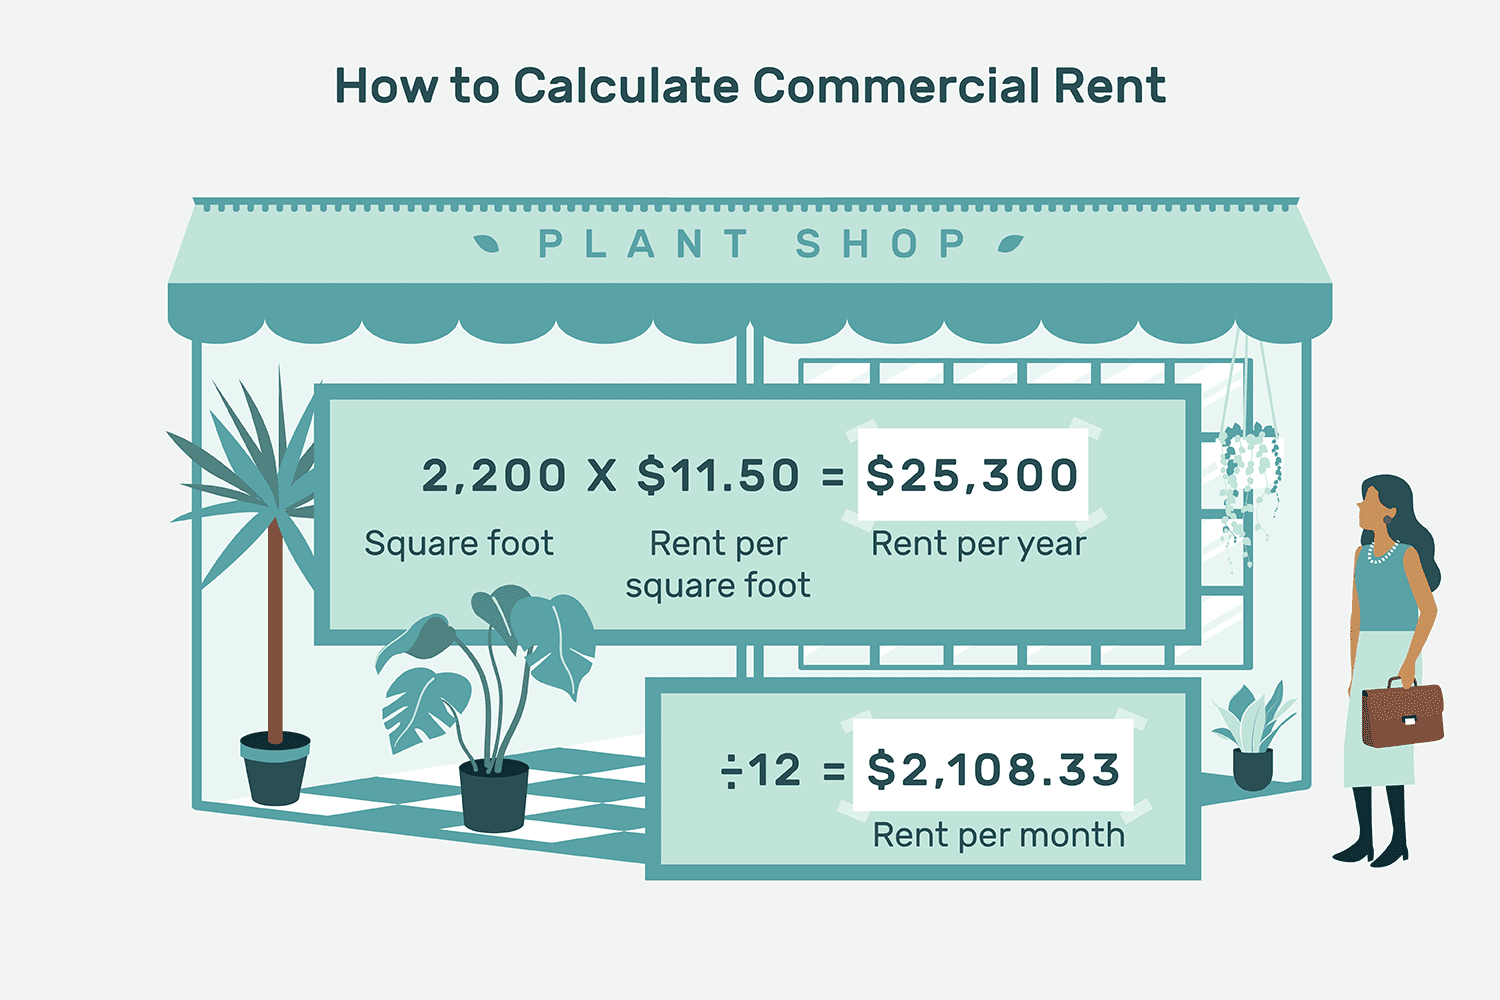 how to calculate commercial rental space? 2